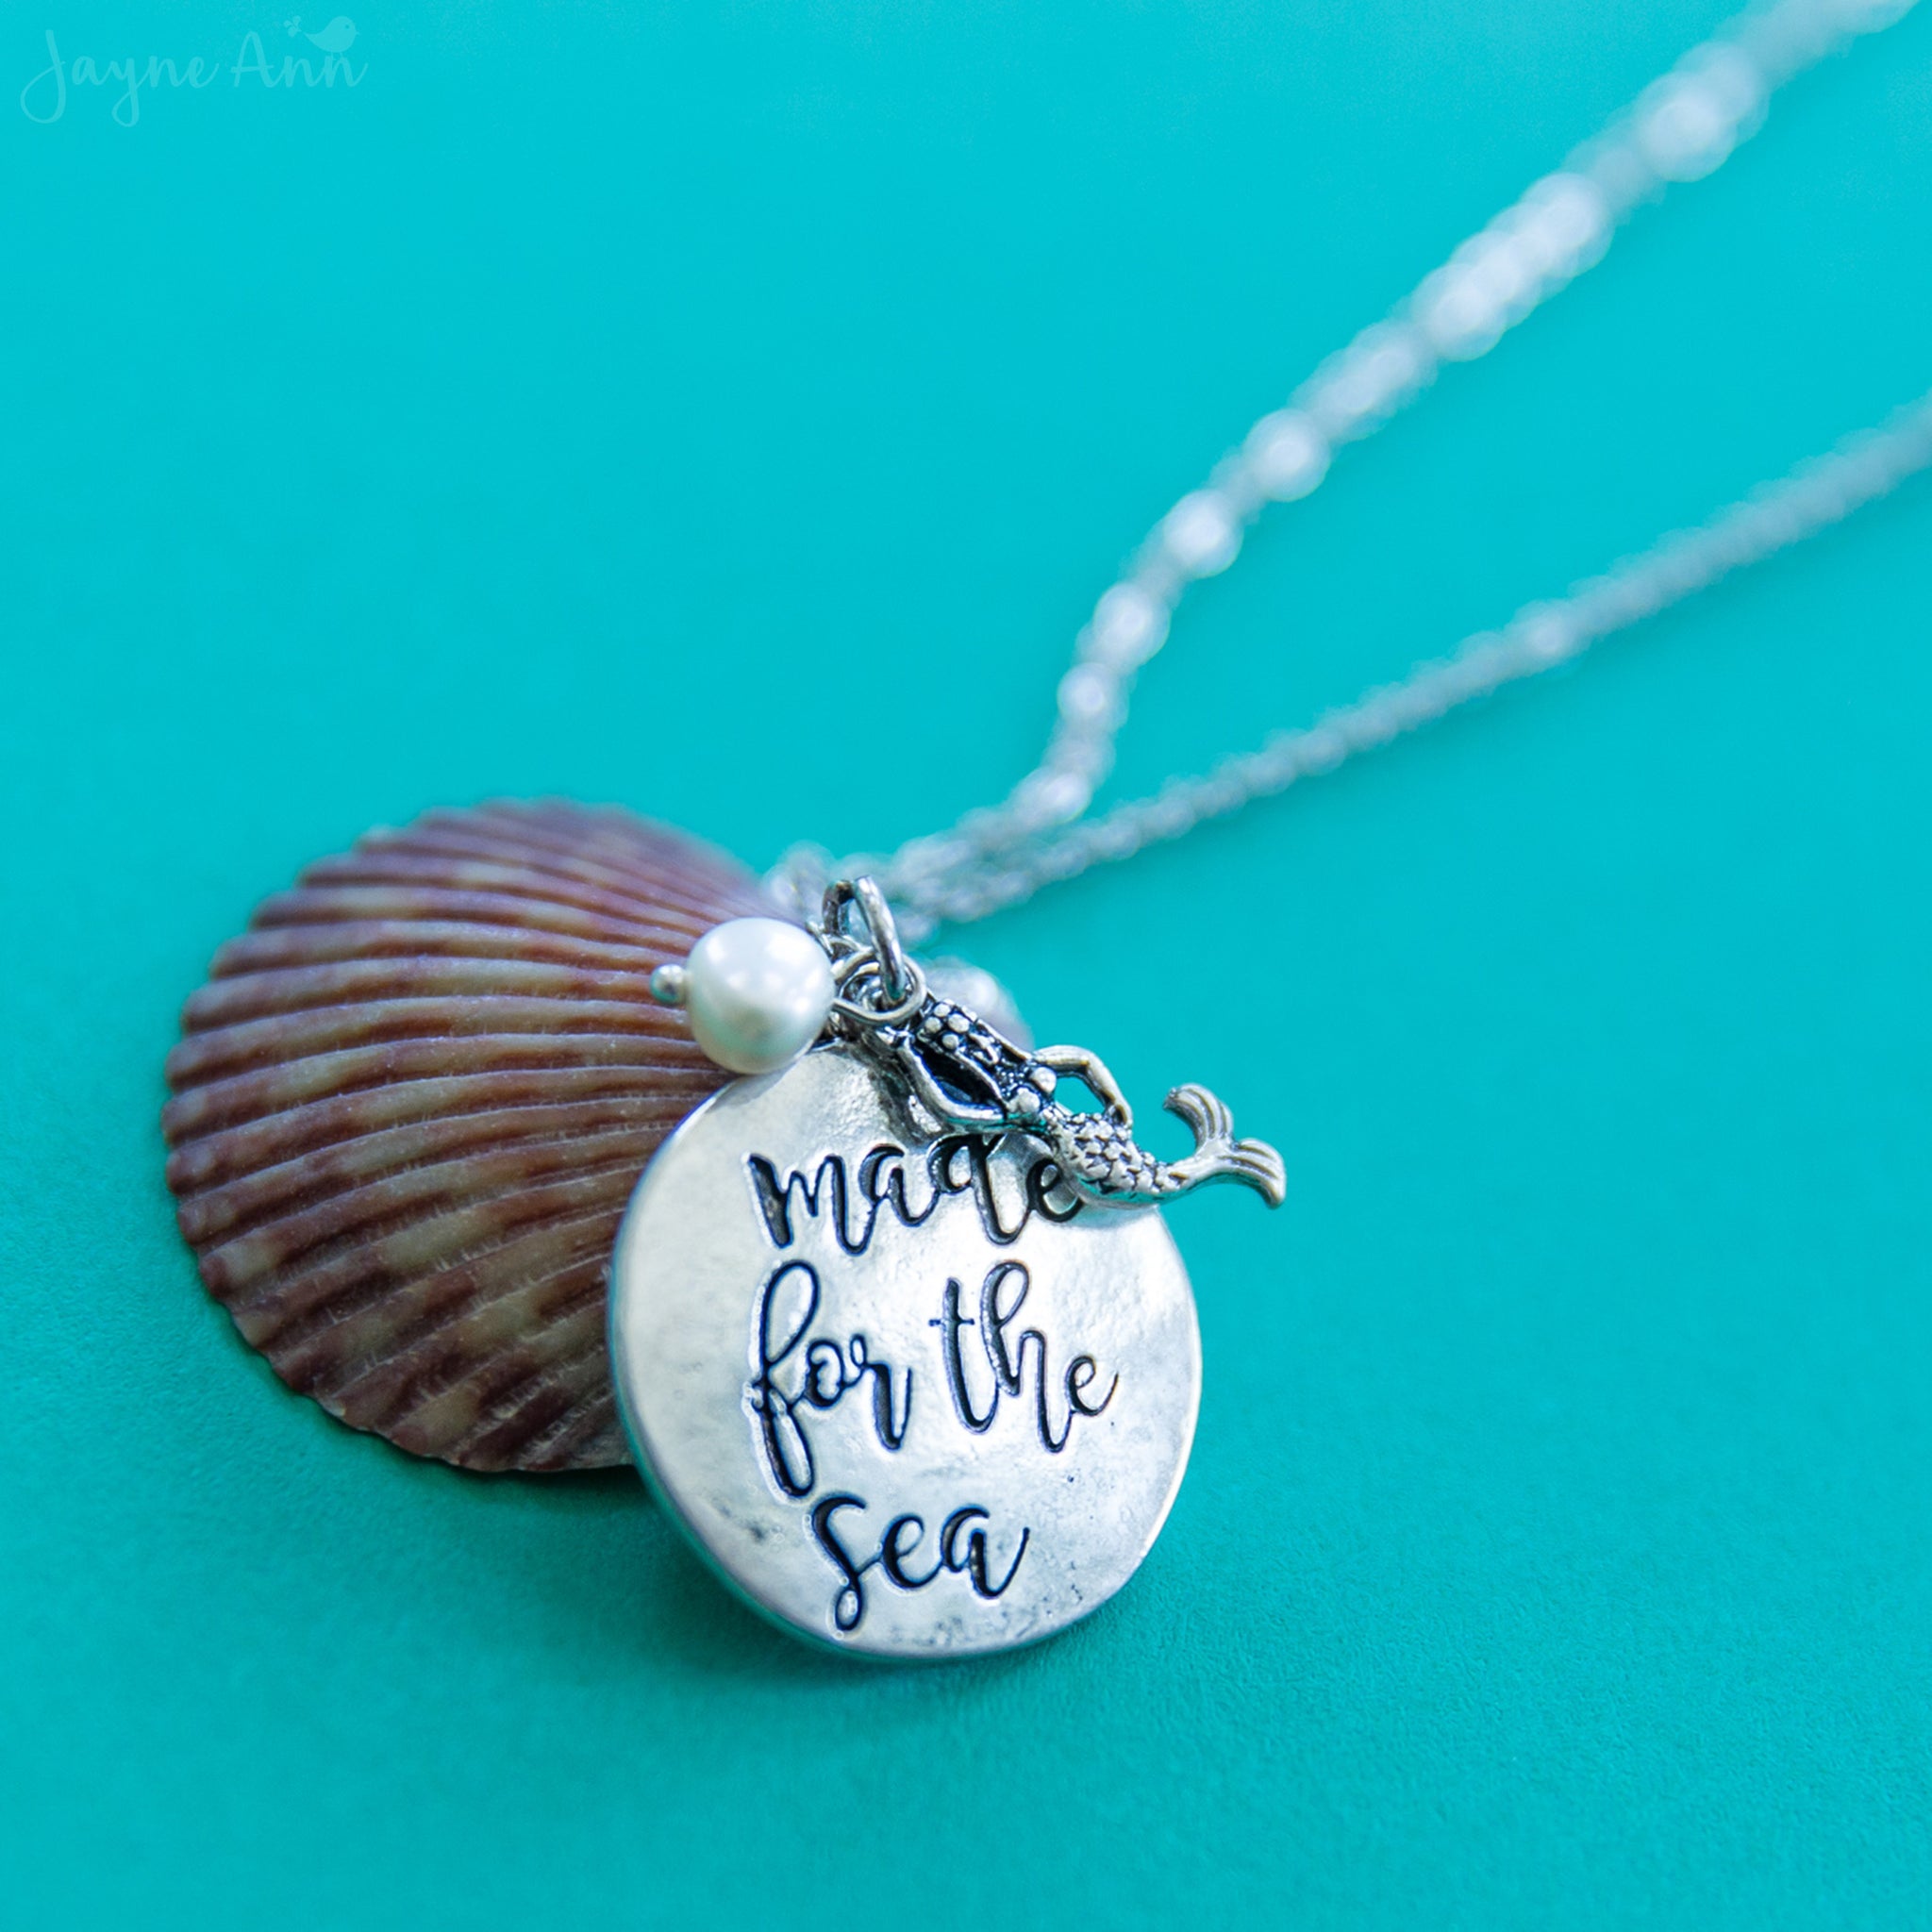 Made for the Sea Stamped Necklace